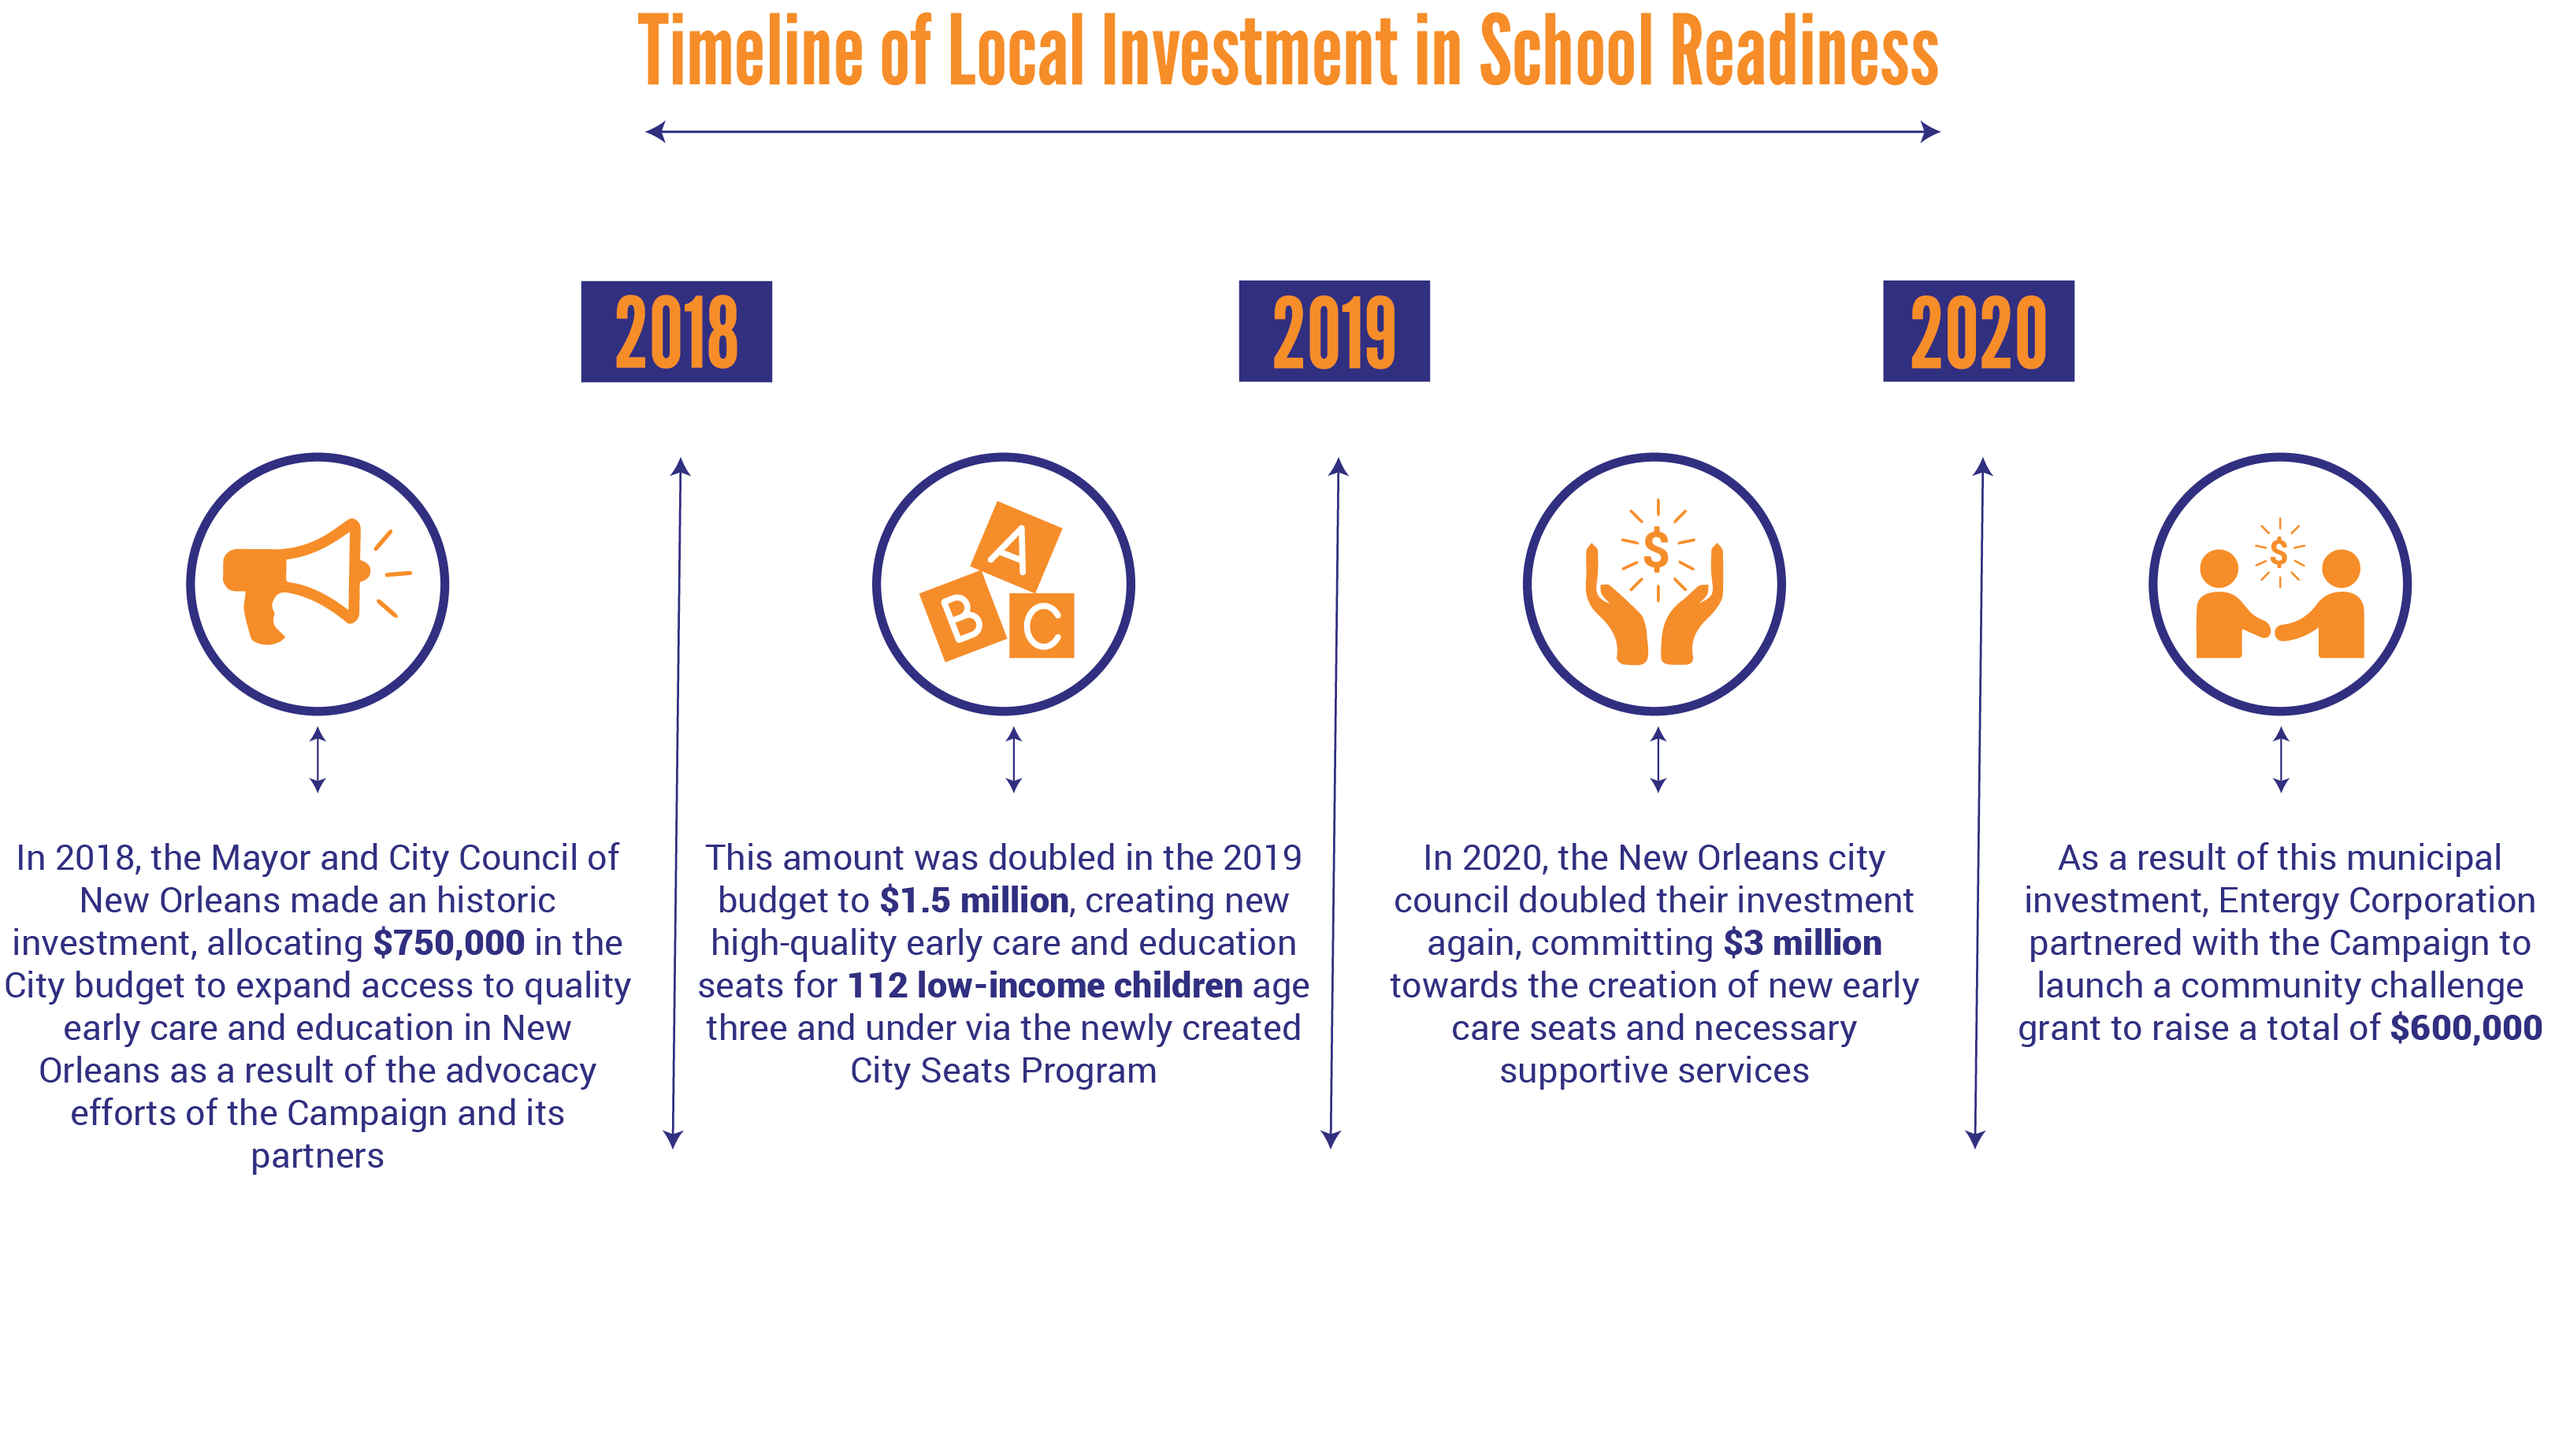 school readiness investments